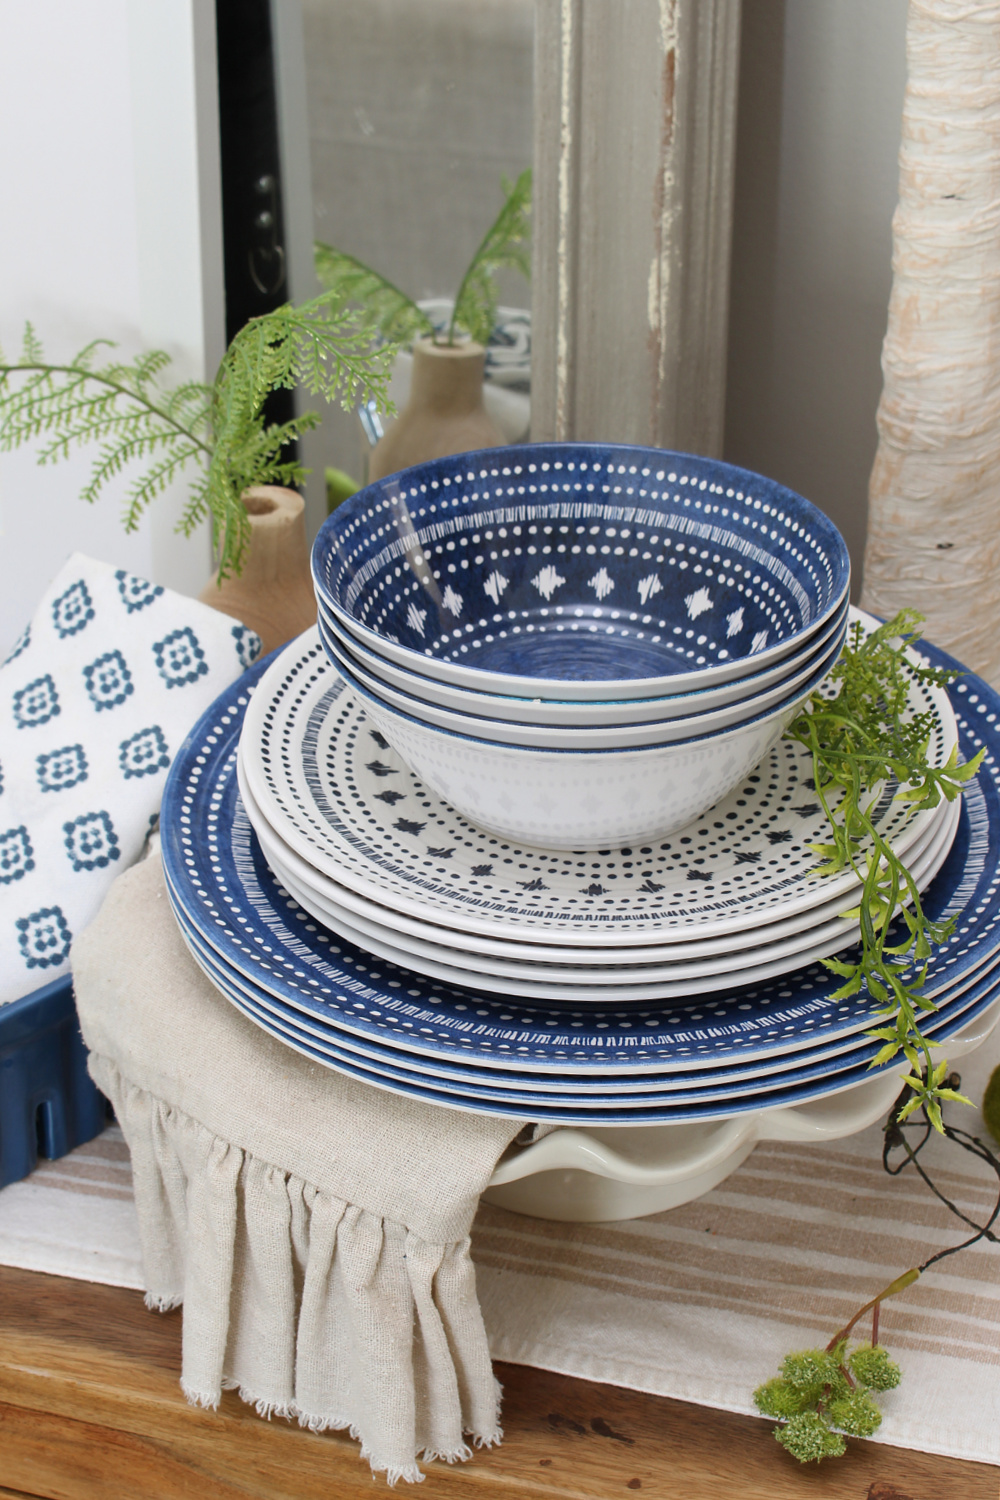 Summer dining room with melamine plates and bowls.